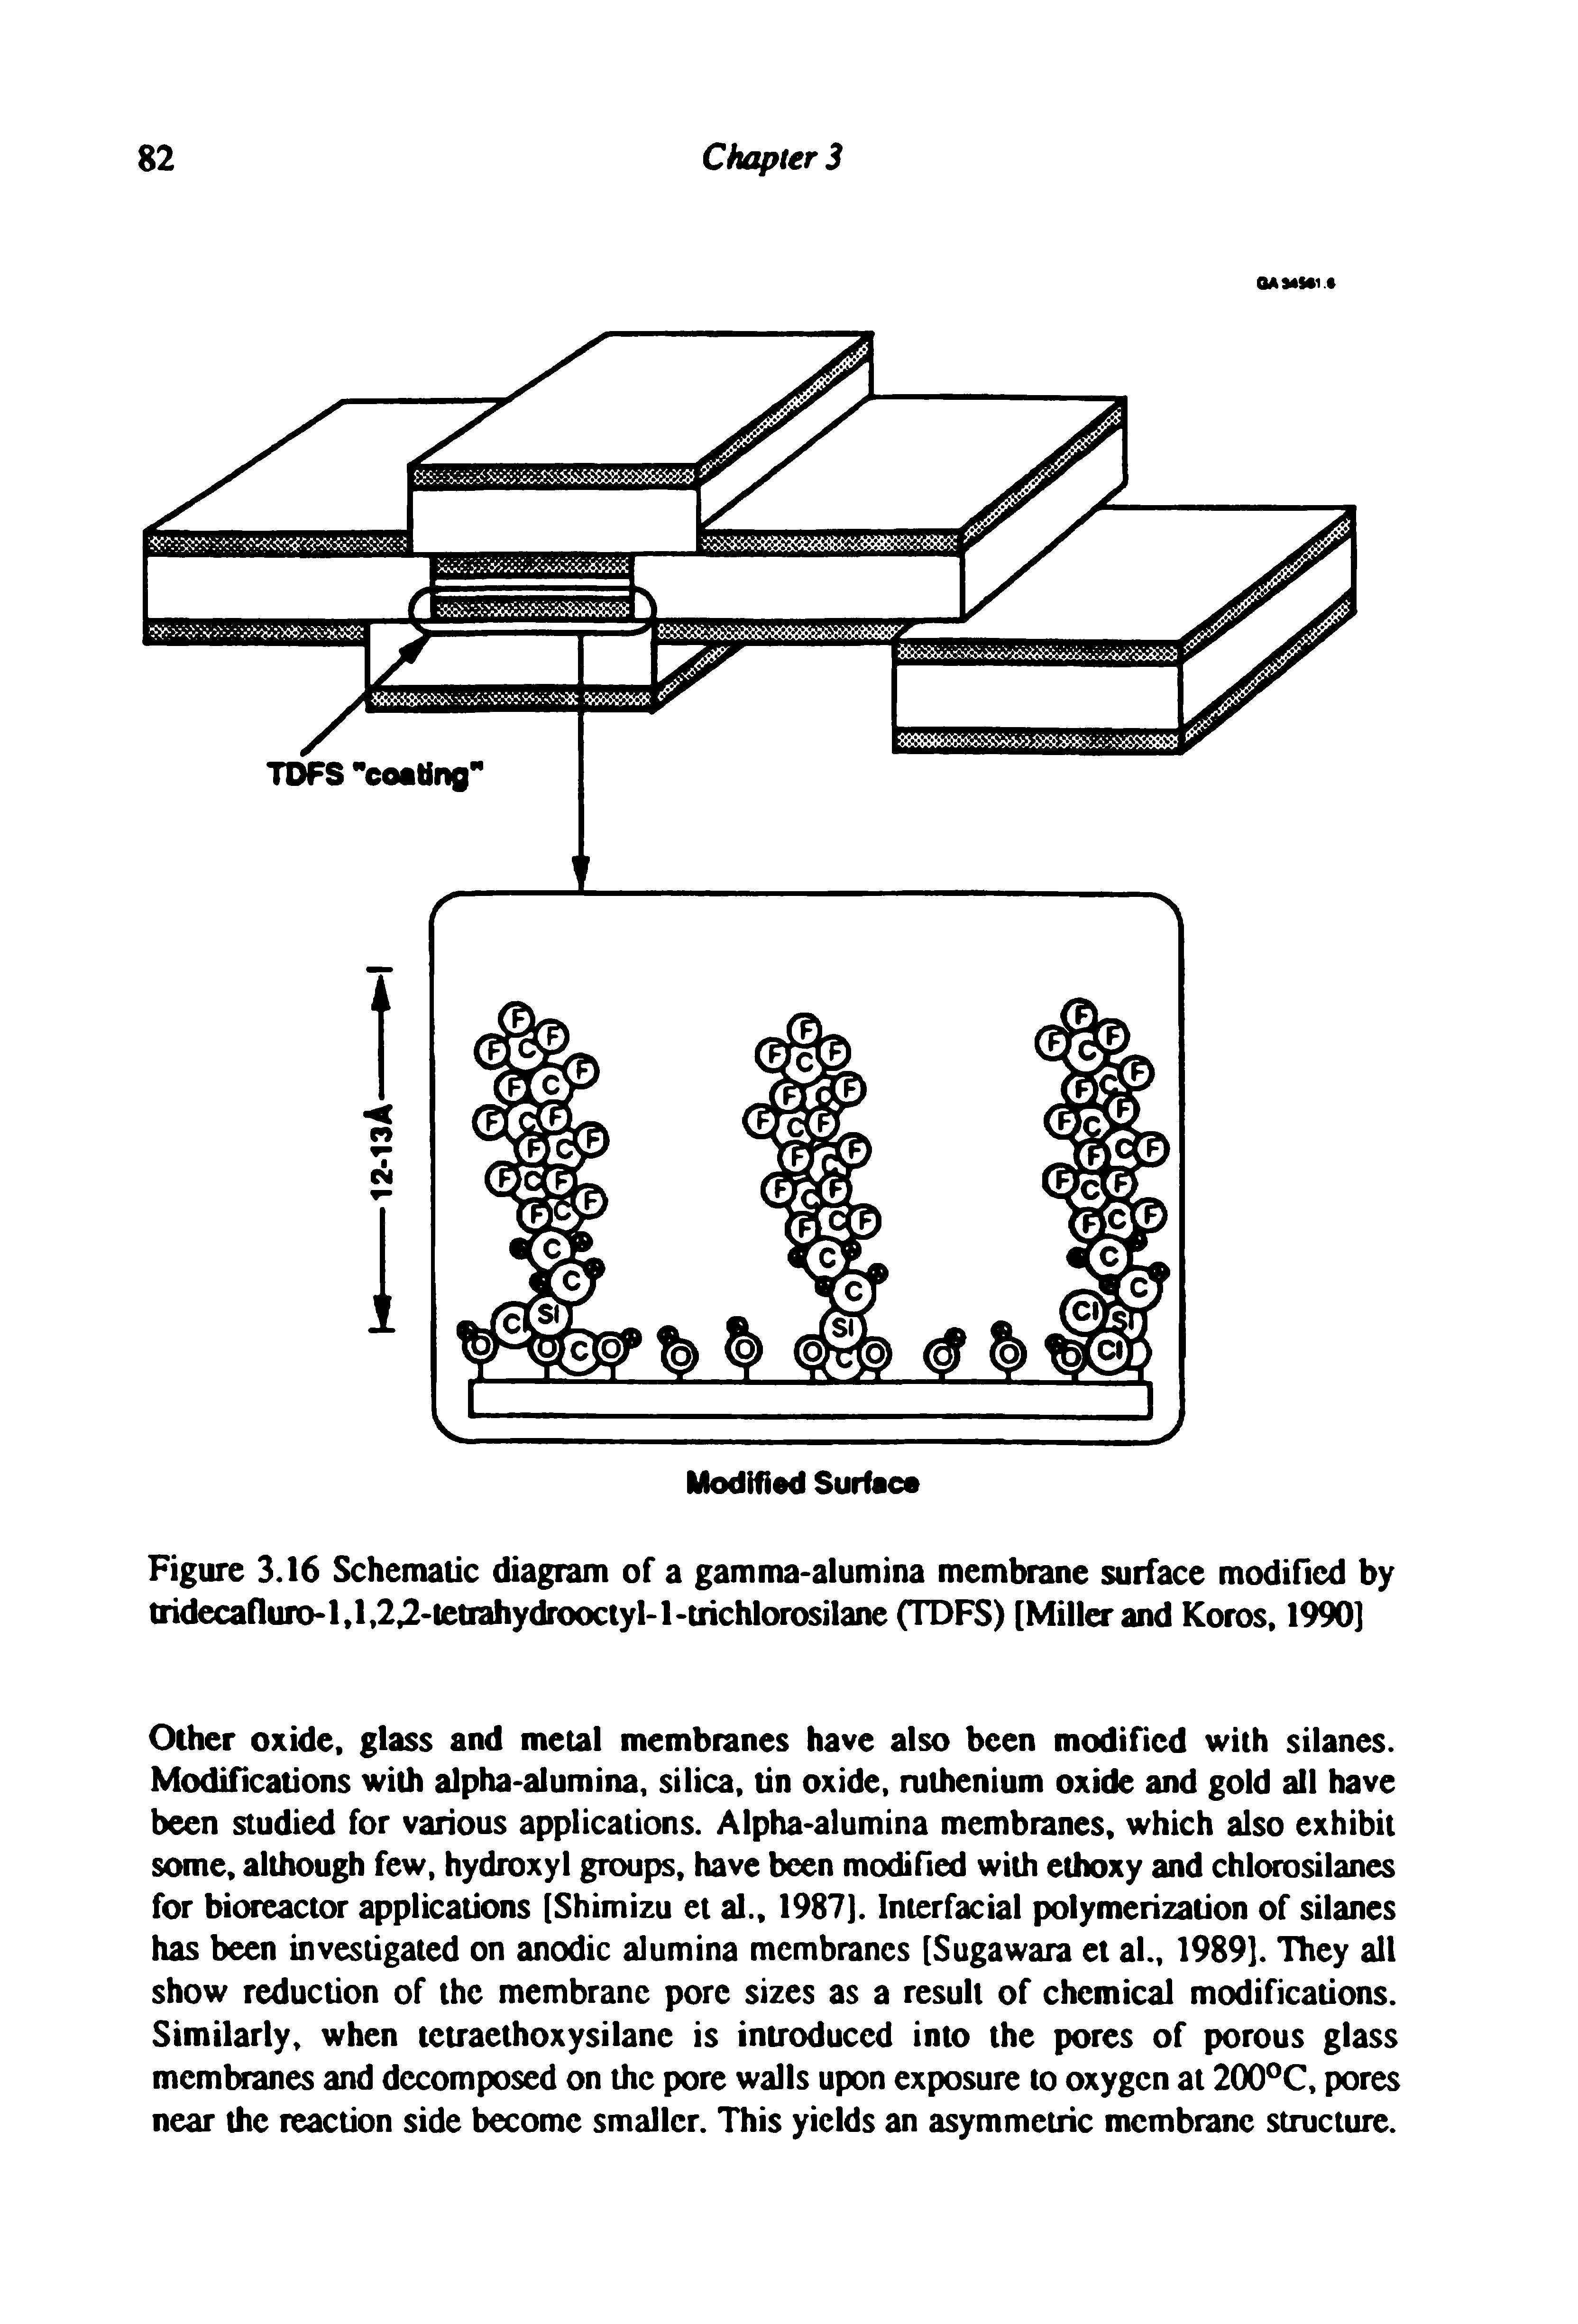 Figure 3.16 Schematic diagram of a gamma-alumina membrane surface modified by tridecafluro-l,l,2 -ietiahydrooctyM-crichlorosilane (TDFS) [Miller and Koros, 1990]...